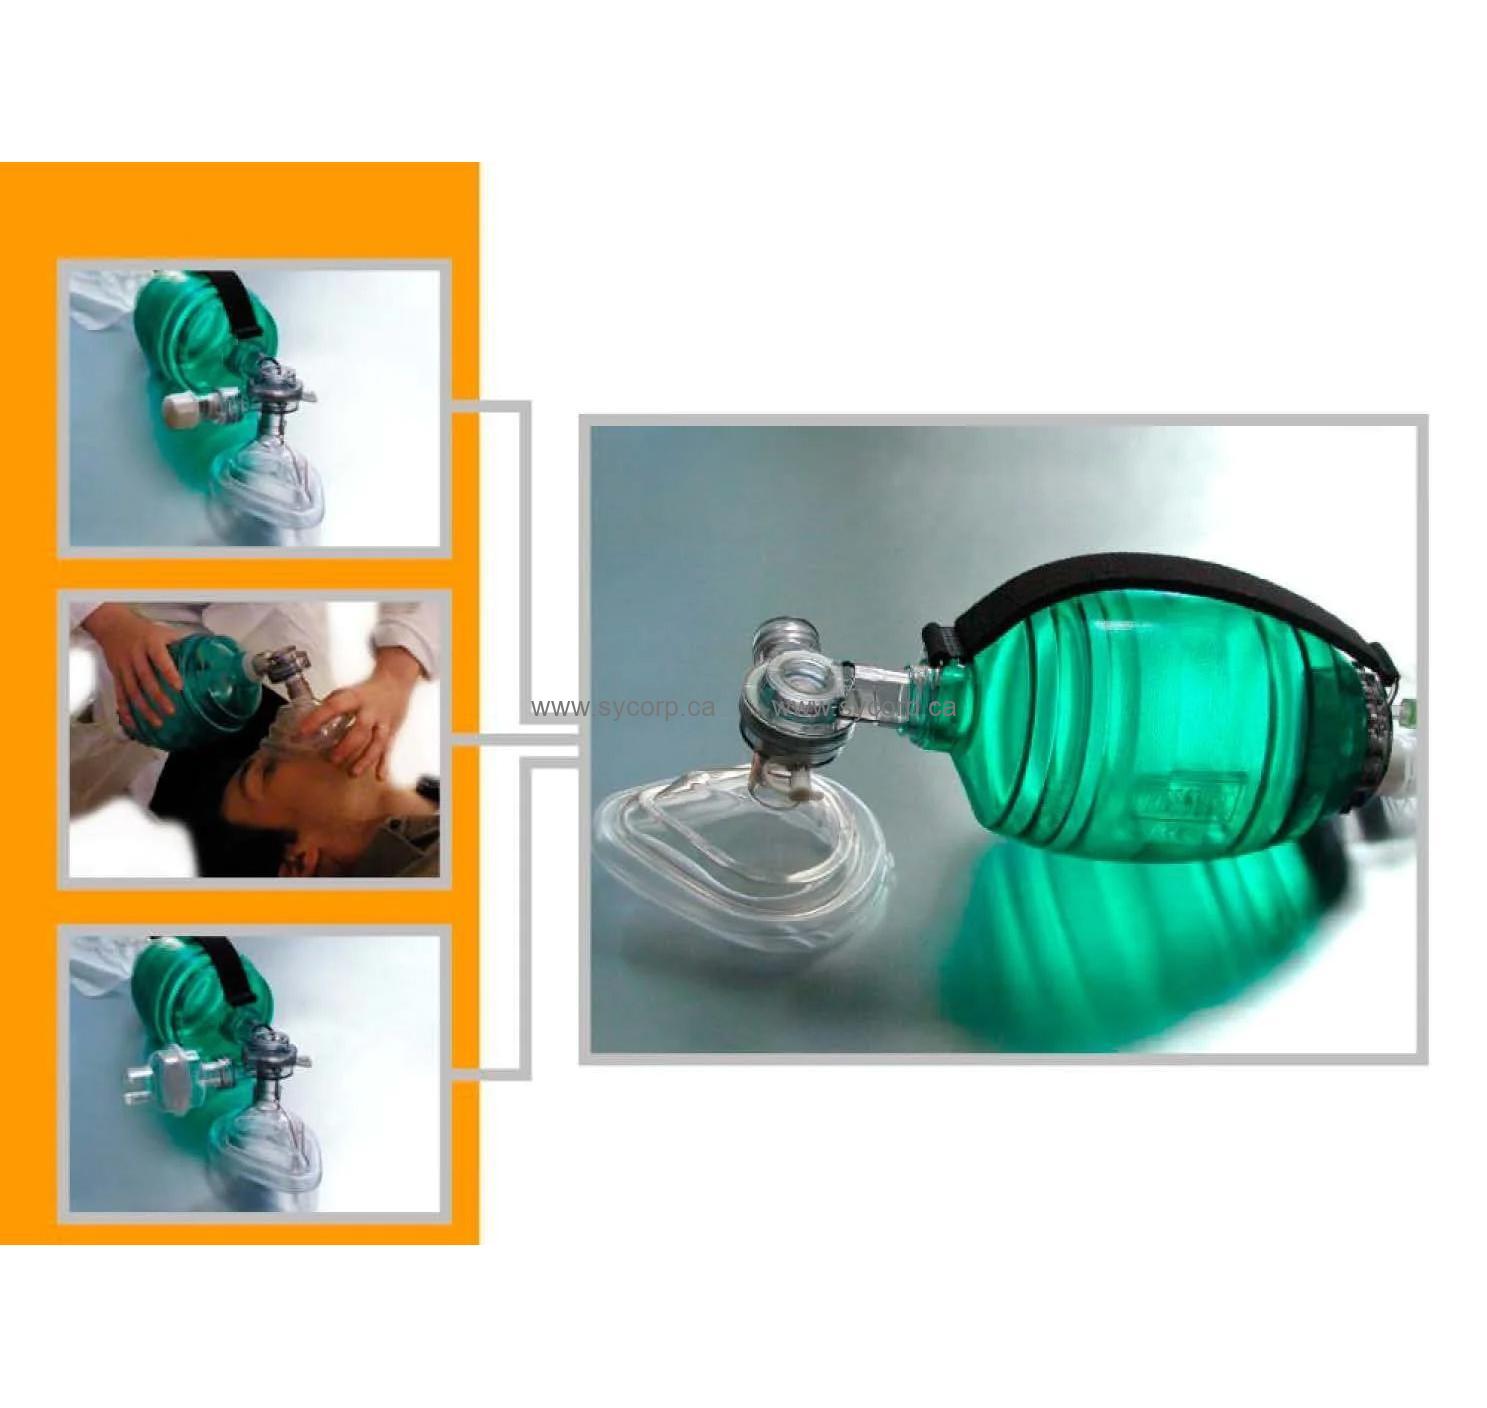 Disposable Bag-Valve-Mask (BVM), Manually Operated Self-Inflating ...